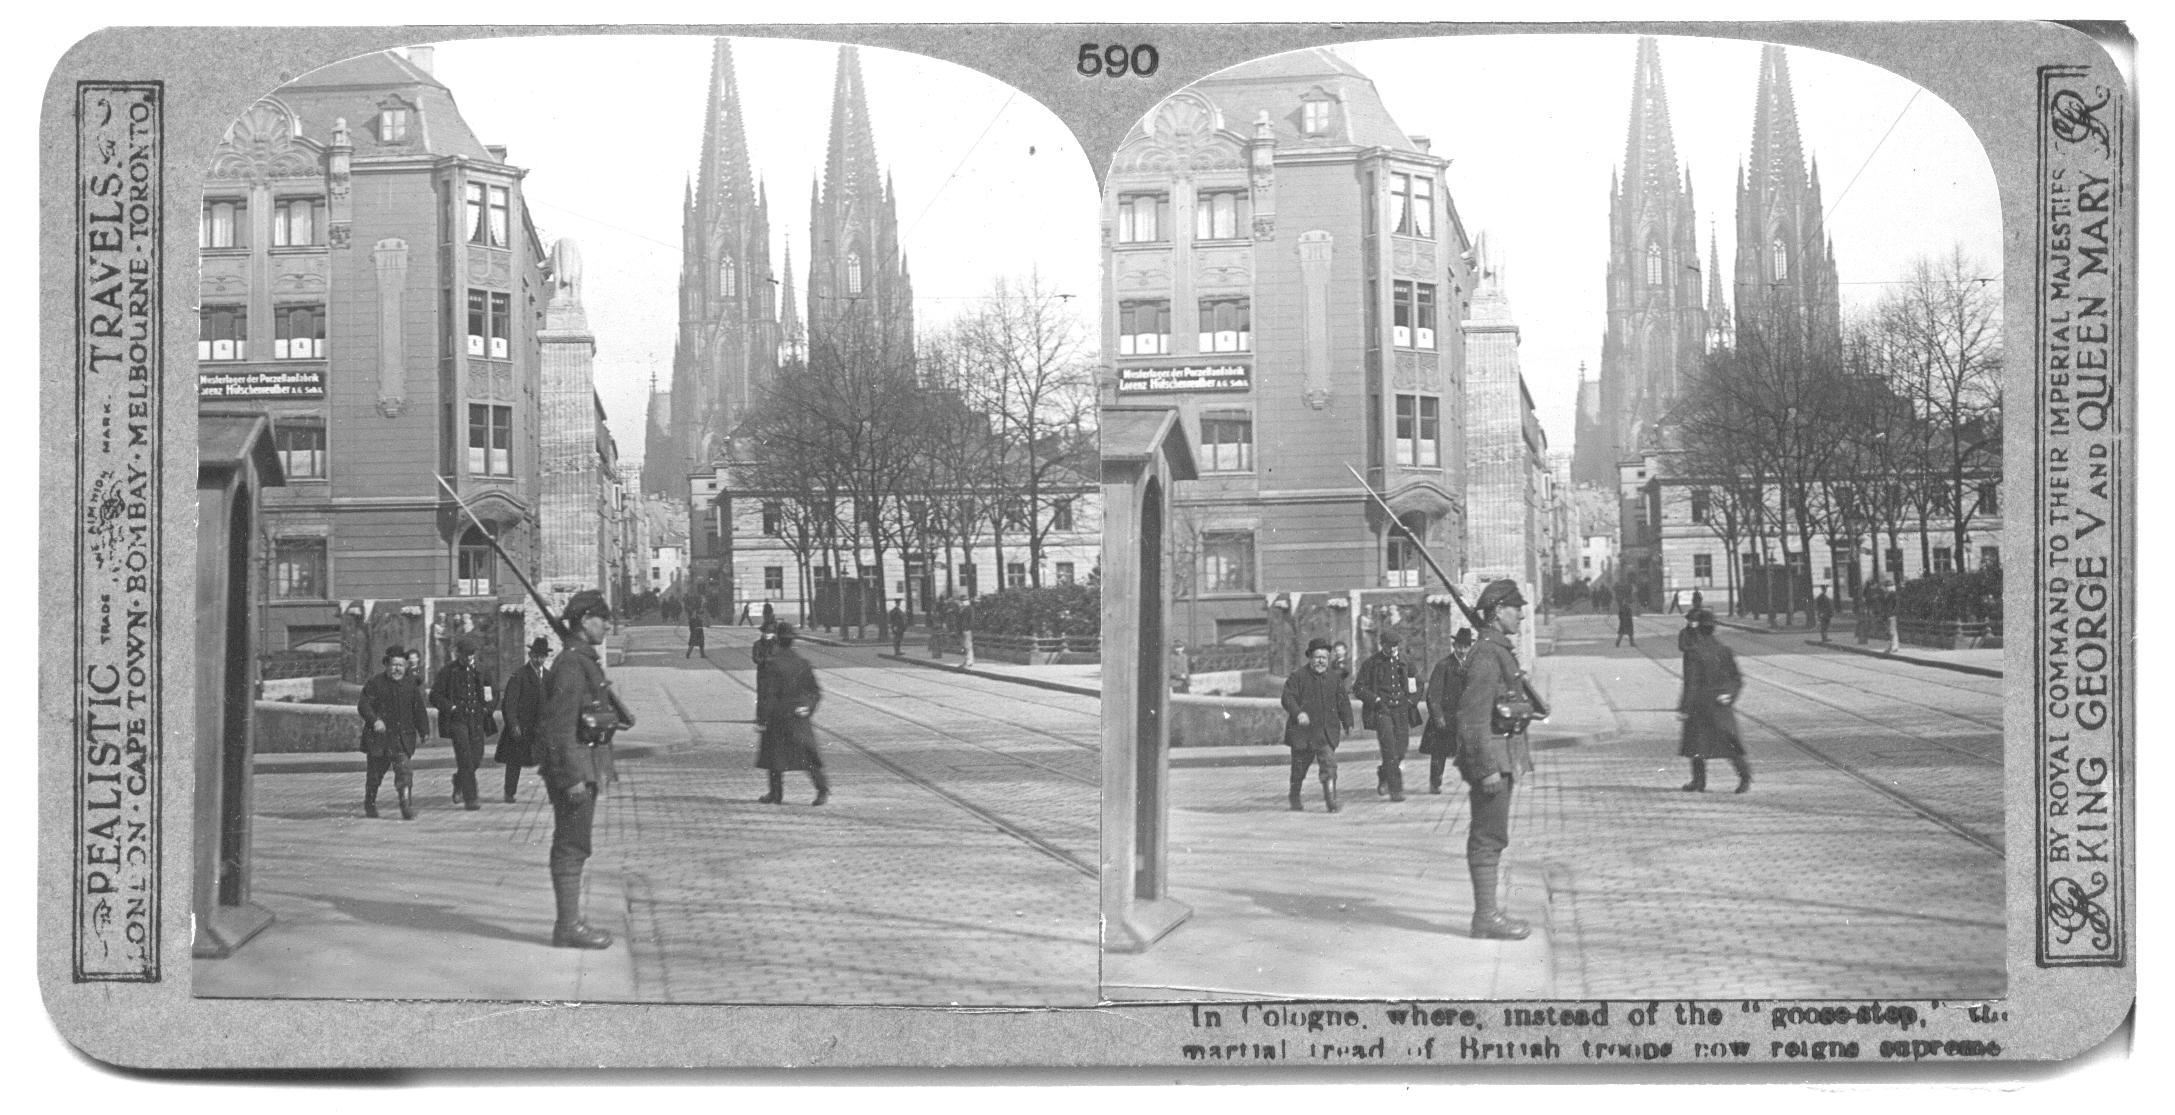 In Cologne, where, instead of the "goose-step," the martial tread of British troops now reigns supreme